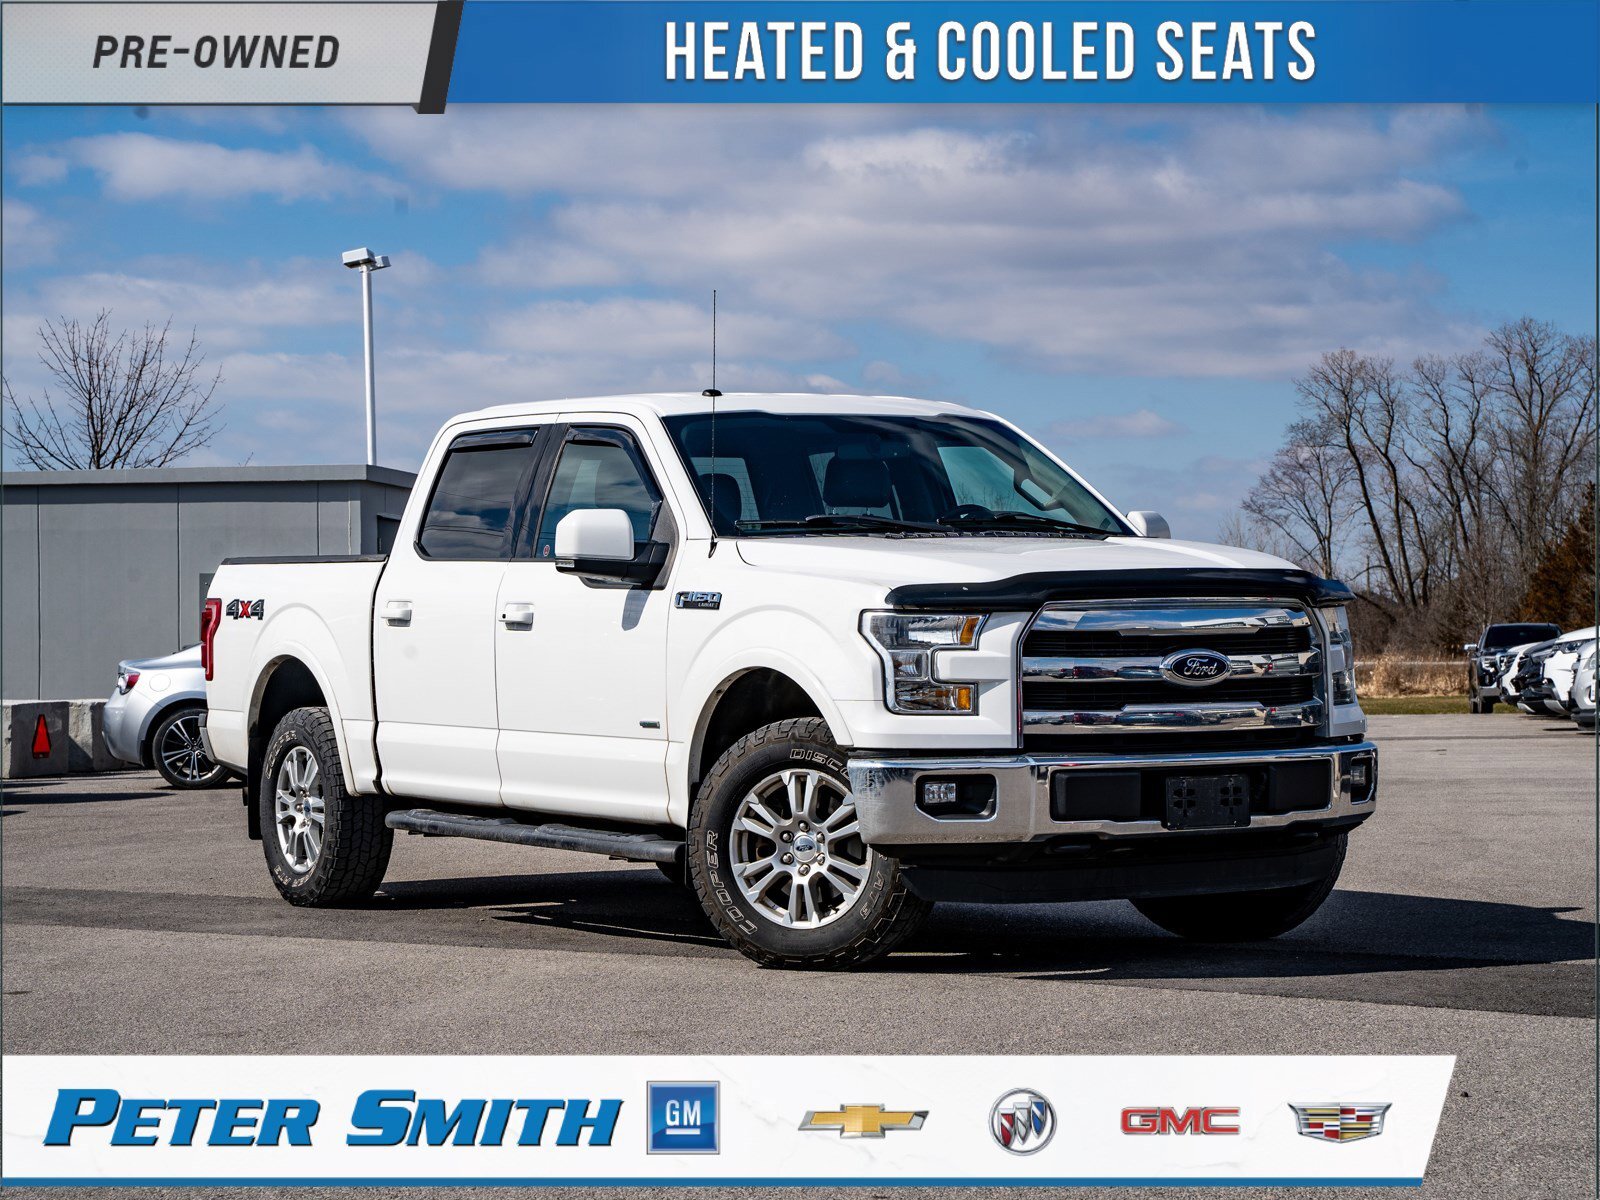 2016 Ford F-150 Lariat - 3.5L Ti-VCT FFV V6 | Heated & Cooled Fron